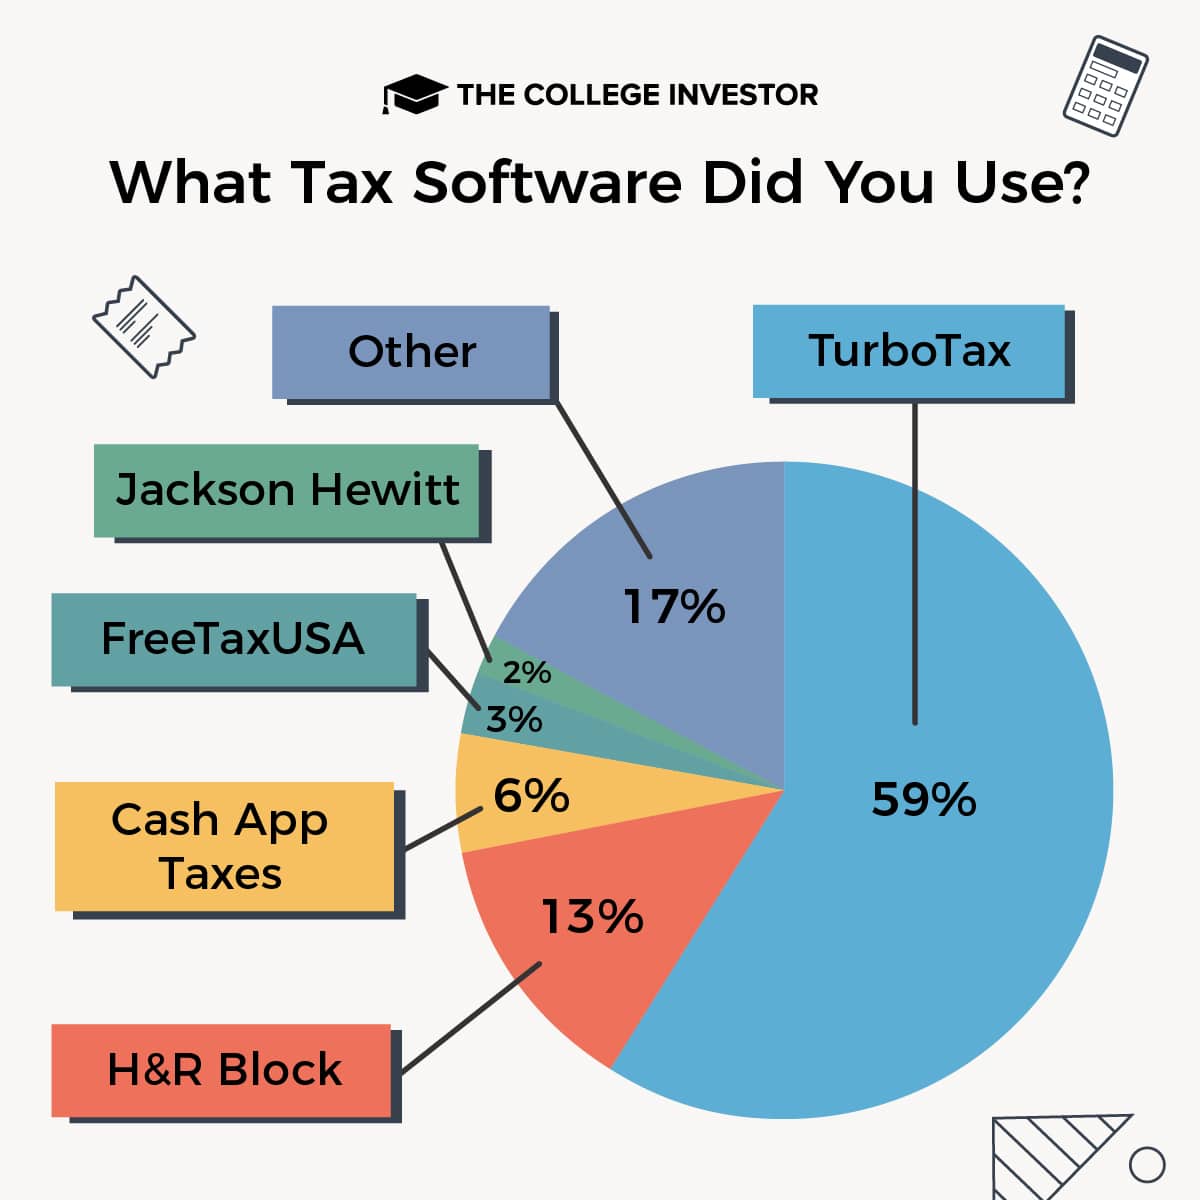 Number one tax software